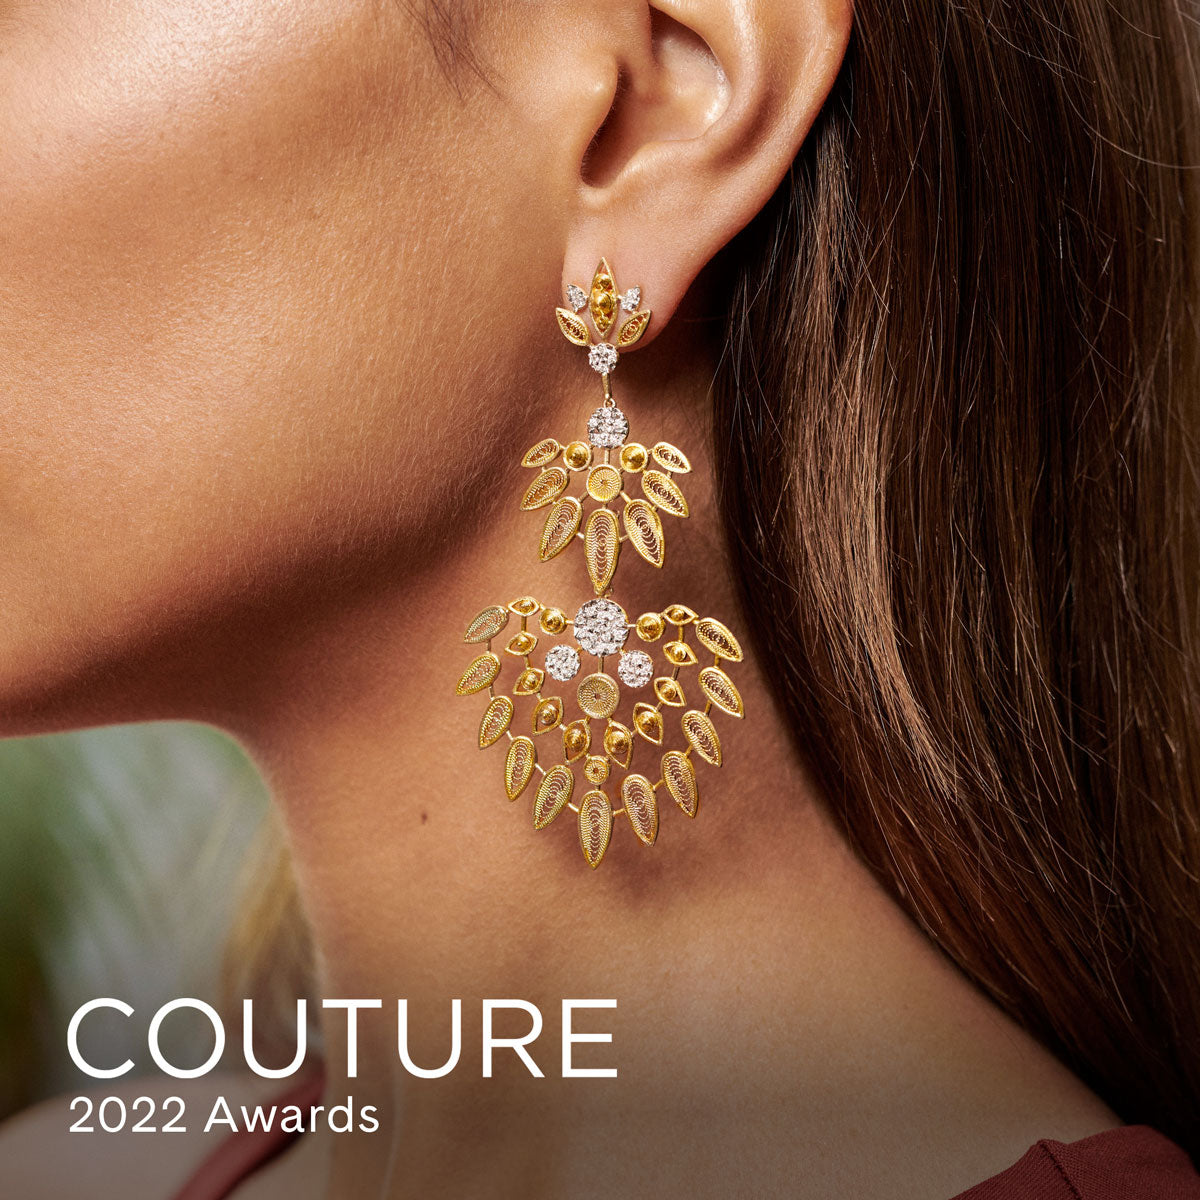 Portuguese Filigree at the Couture 2022 Awards